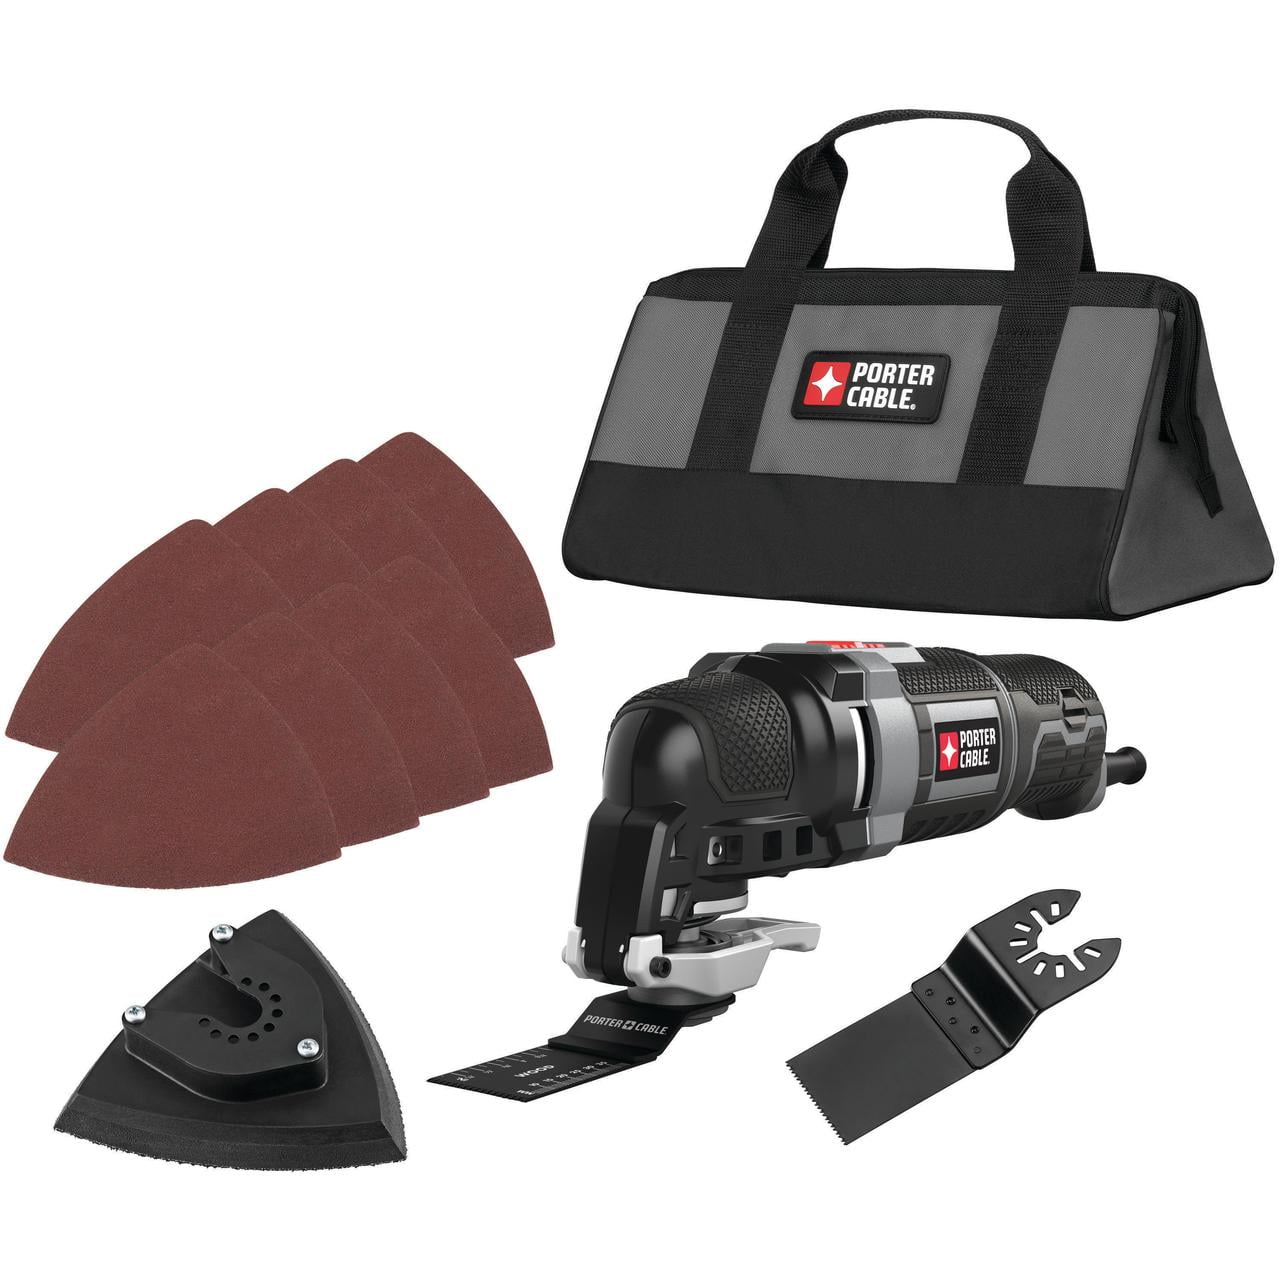 PORTER-CABLE PCE605K 3-Amp Corded Oscillating Multi-Tool Kit with 31 Accessor... 